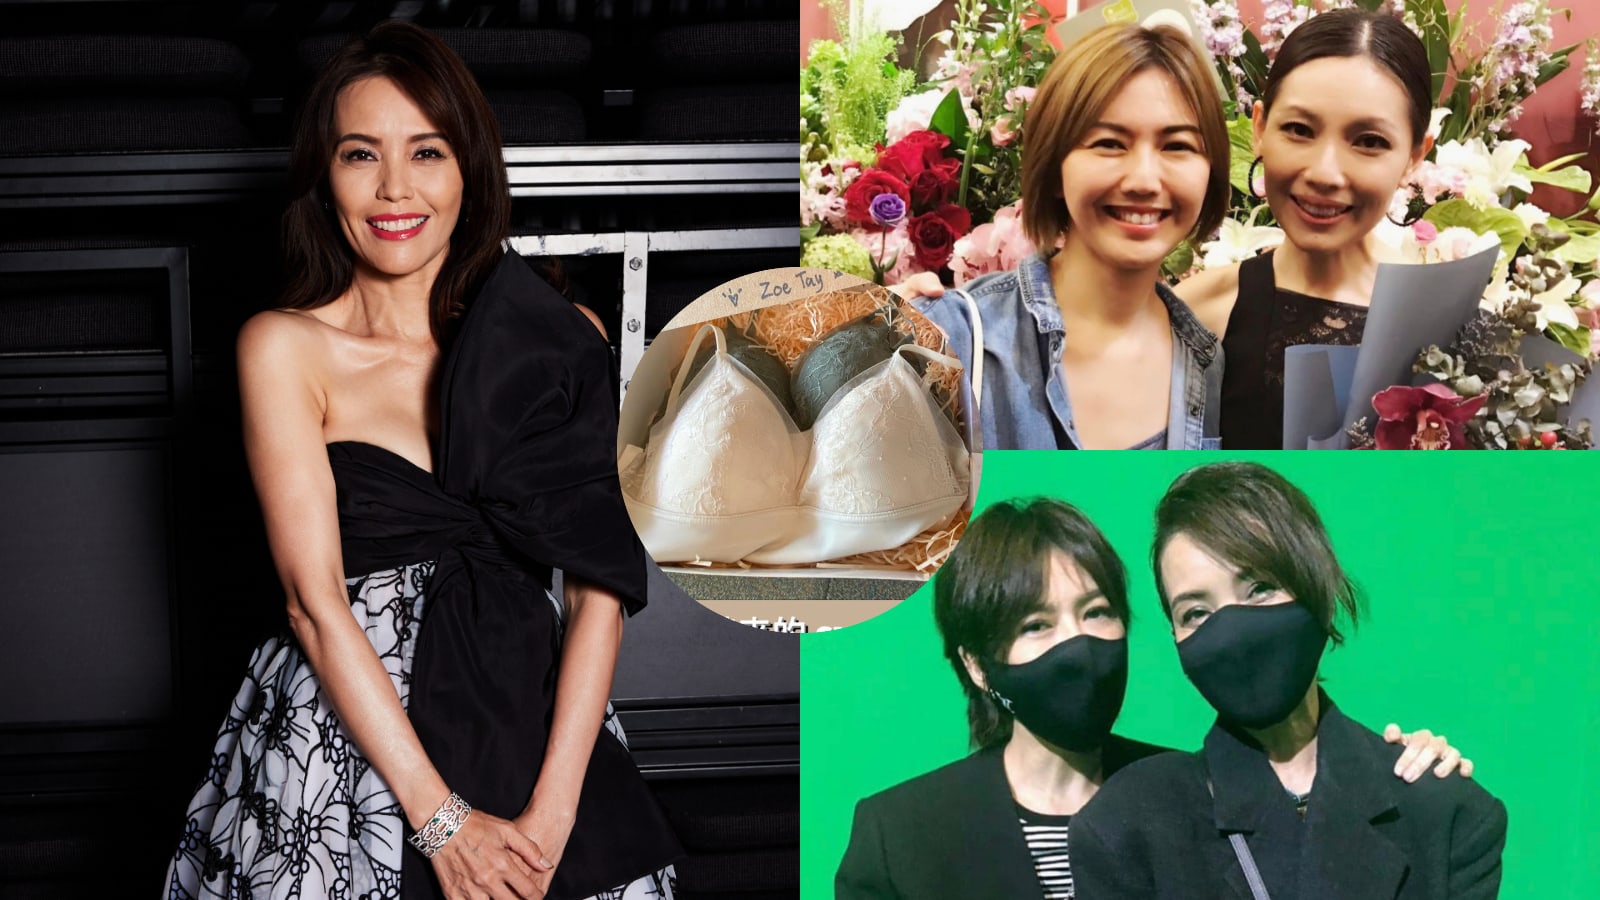 Zoe Tay Gives Bras To Stefanie Sun & Sharon Au; Stef Jokes About Zoe “Thinking Very Highly” Of Her Size